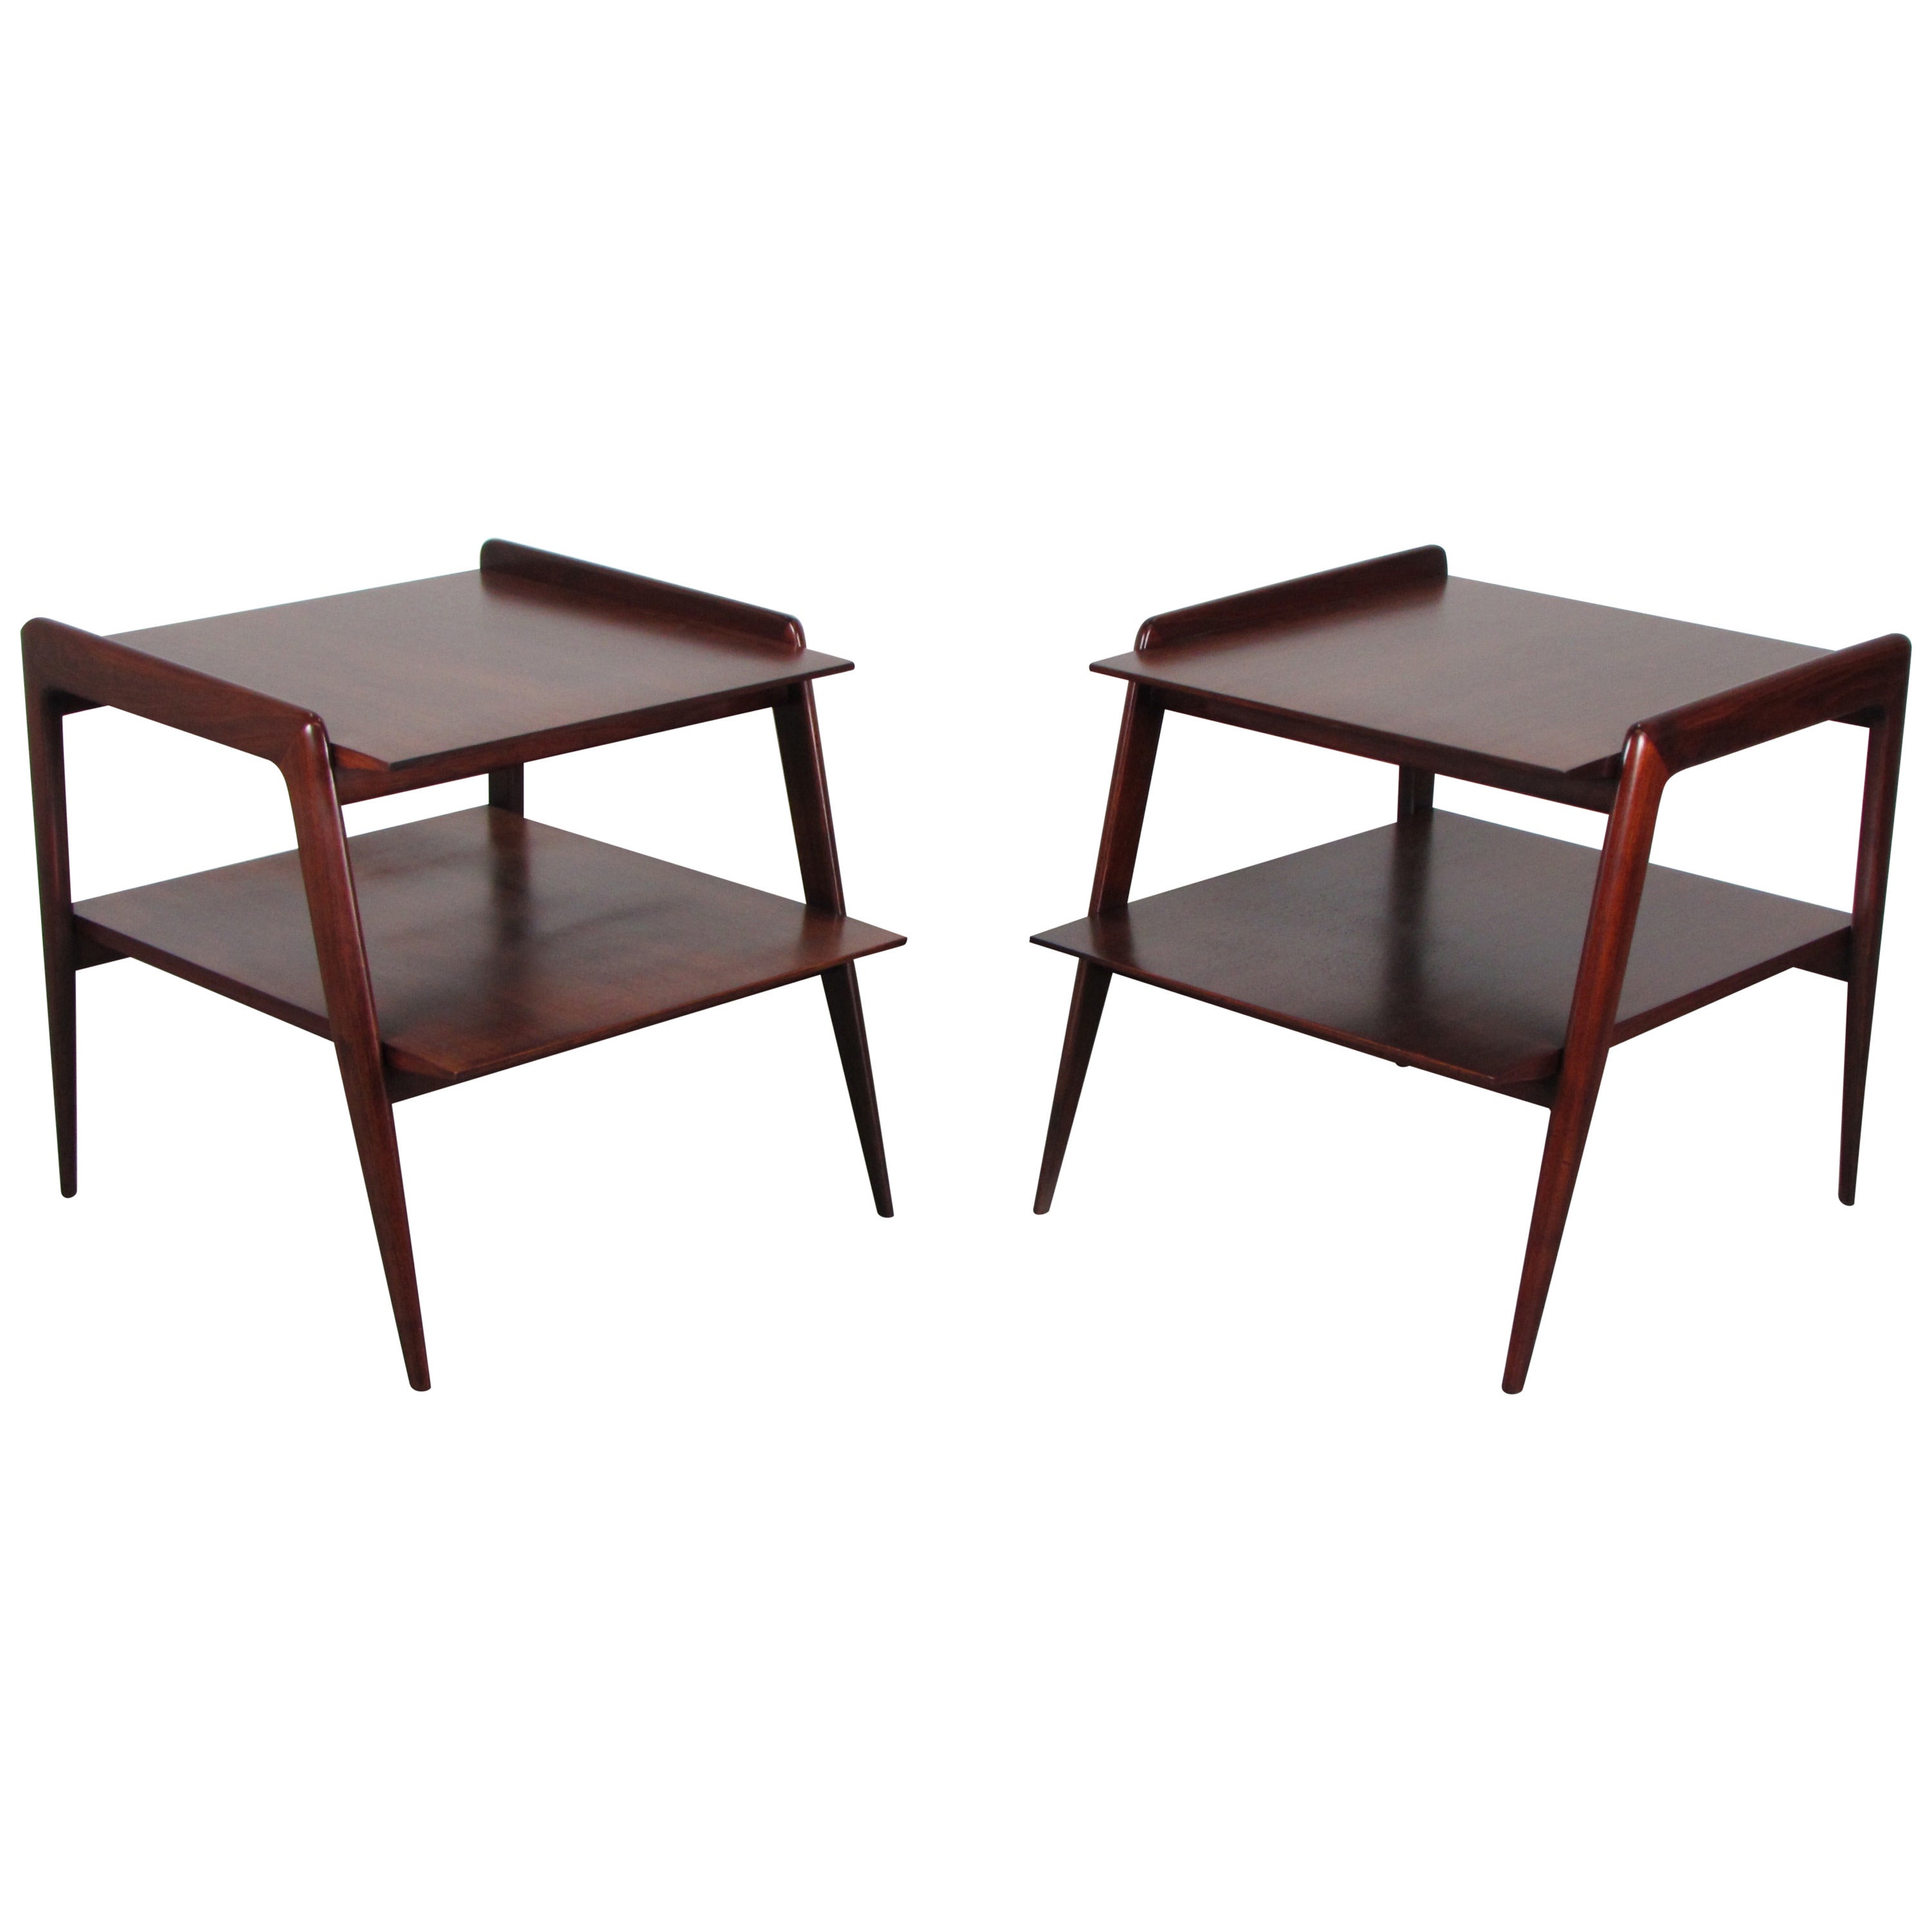 Rare and Wicked Pair of End Tables by M. Singer & Sons, Attributed to Gio Ponti